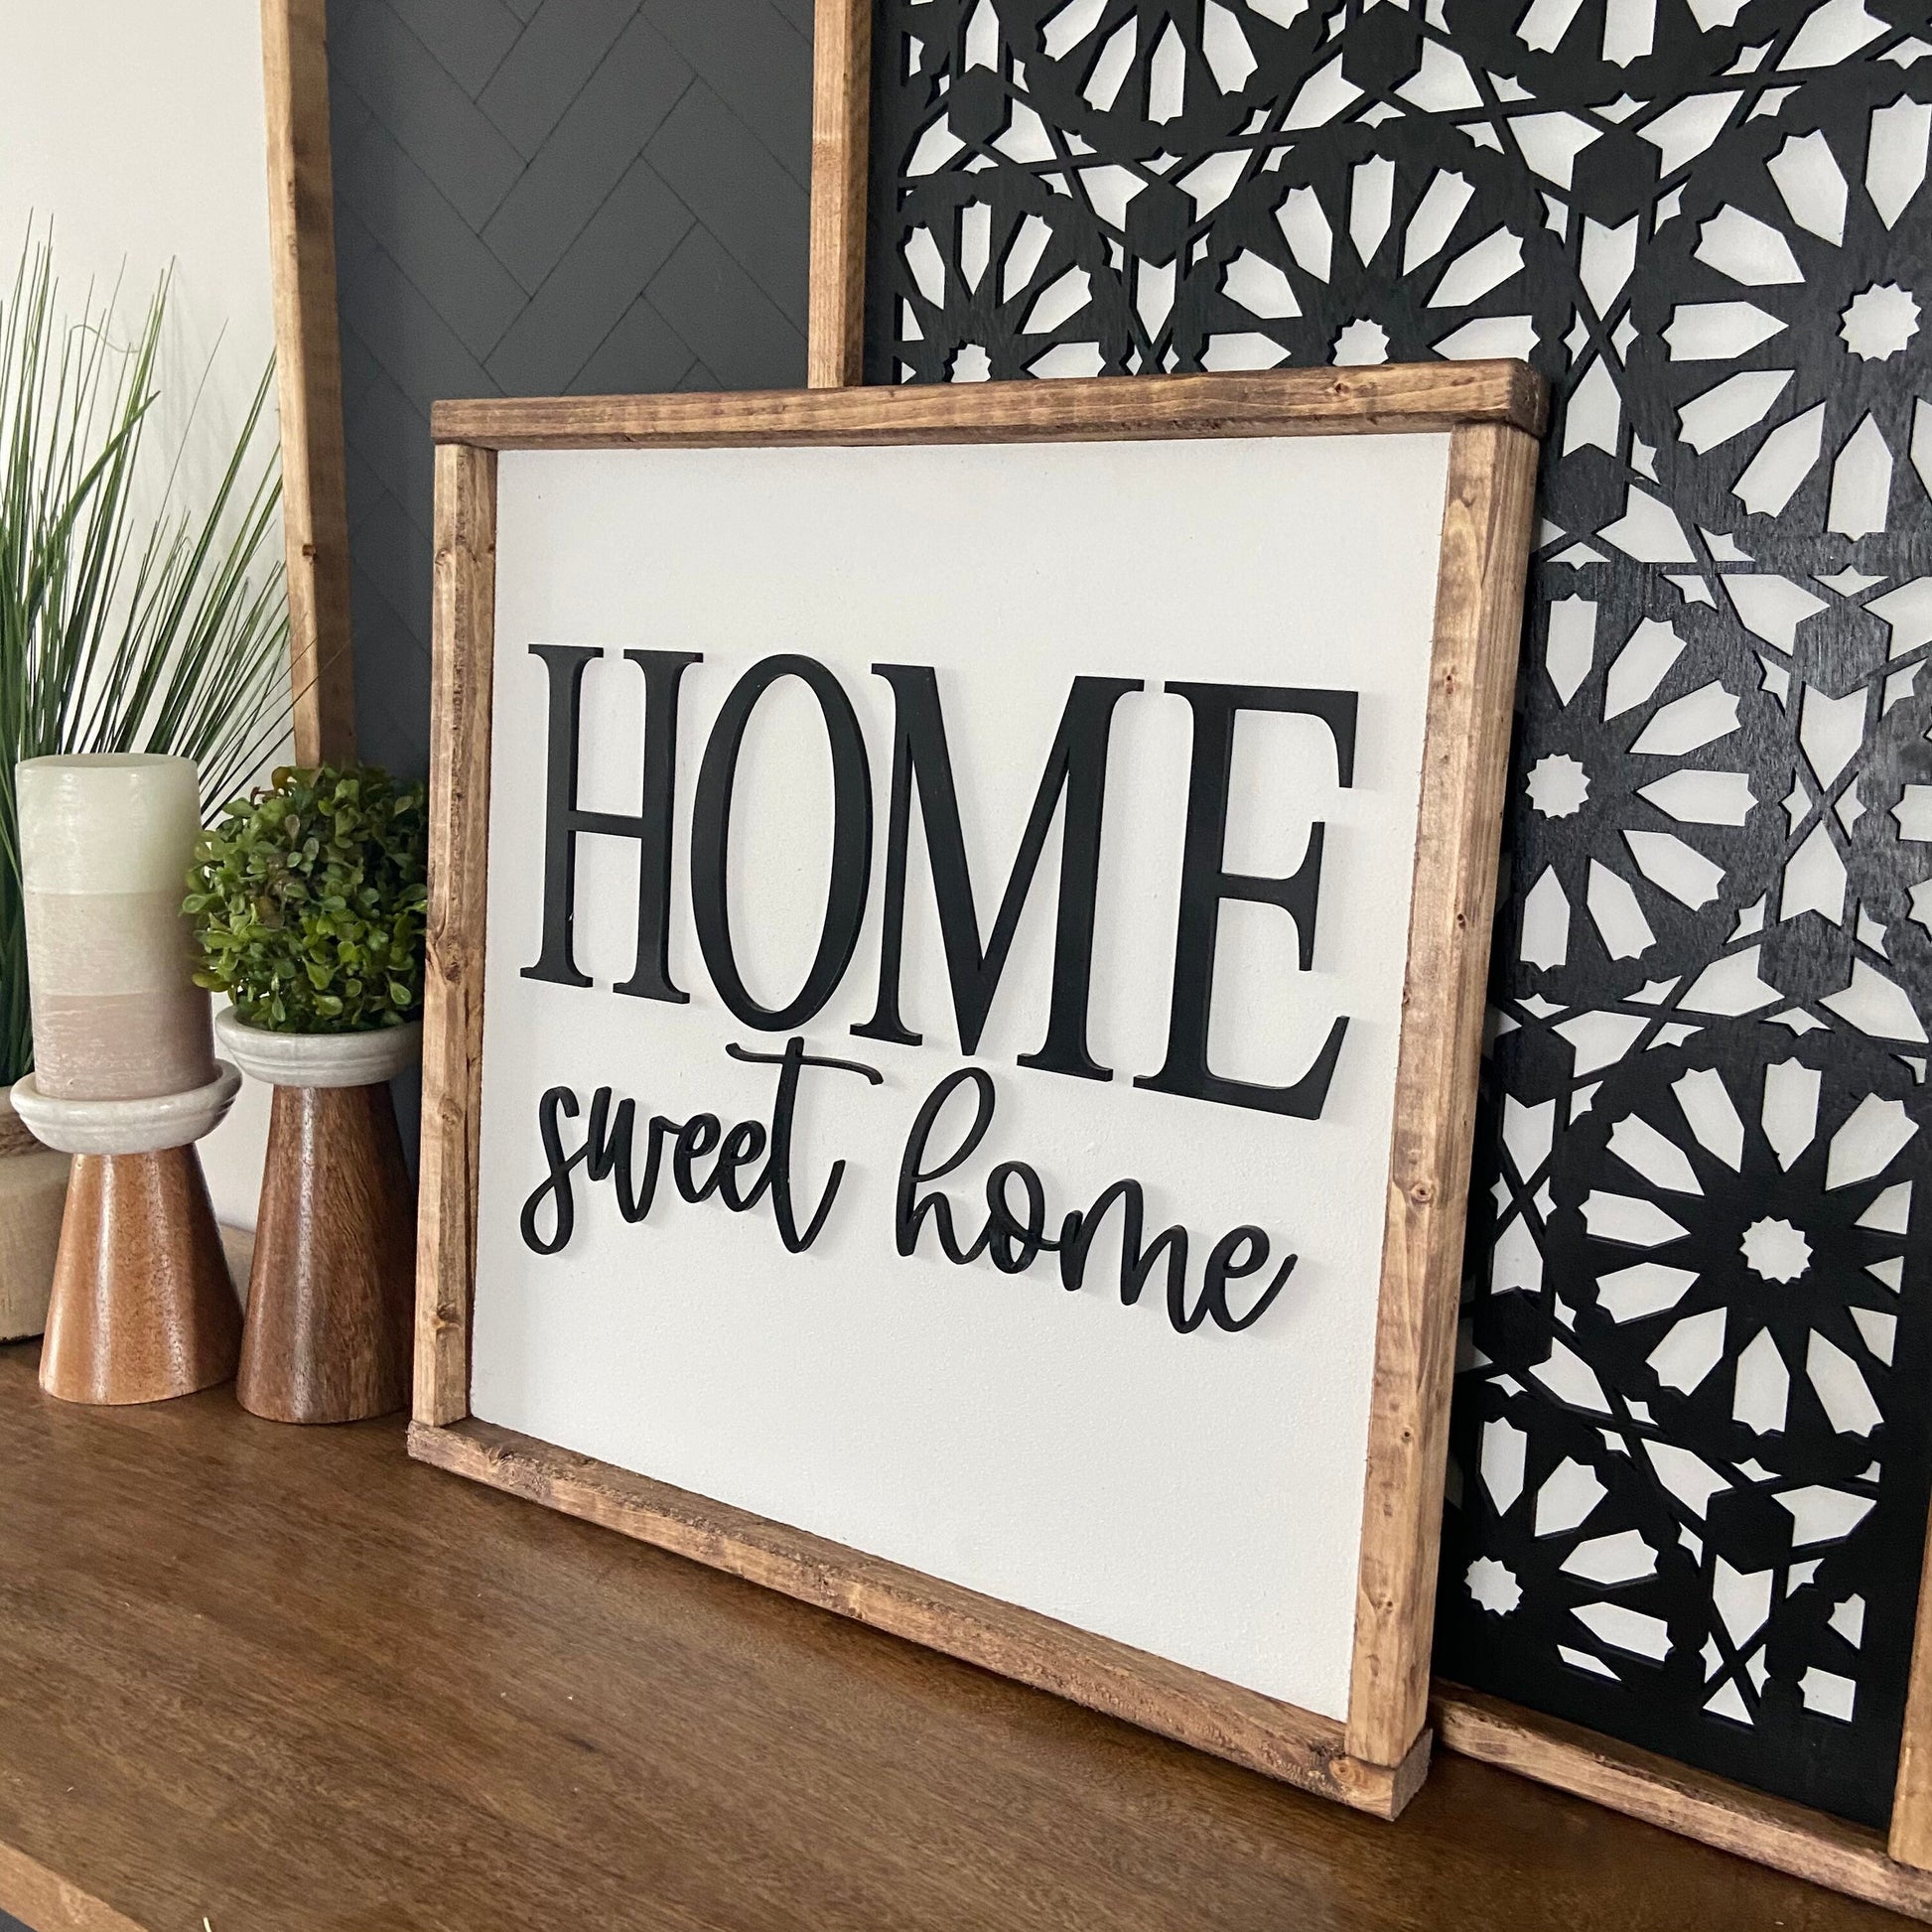 home sweet home bundle - set of 2 - entryway, living room sign [FREE SHIPPING!]